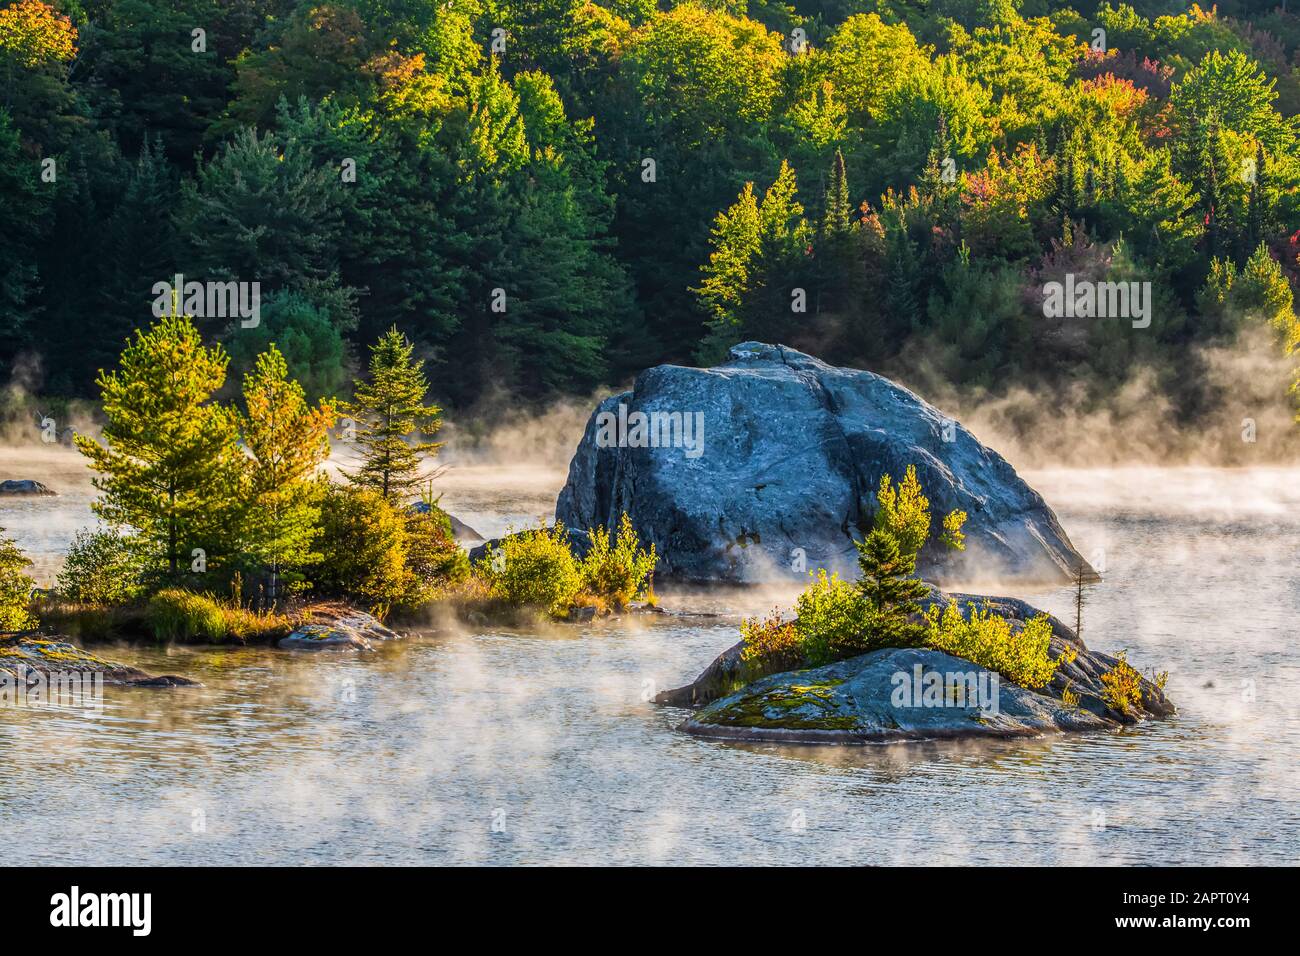 Rock formations with plants in the shallow water of Brome Lake with fog hanging over the surface; Brome Lake, Quebec, Canada Stock Photo